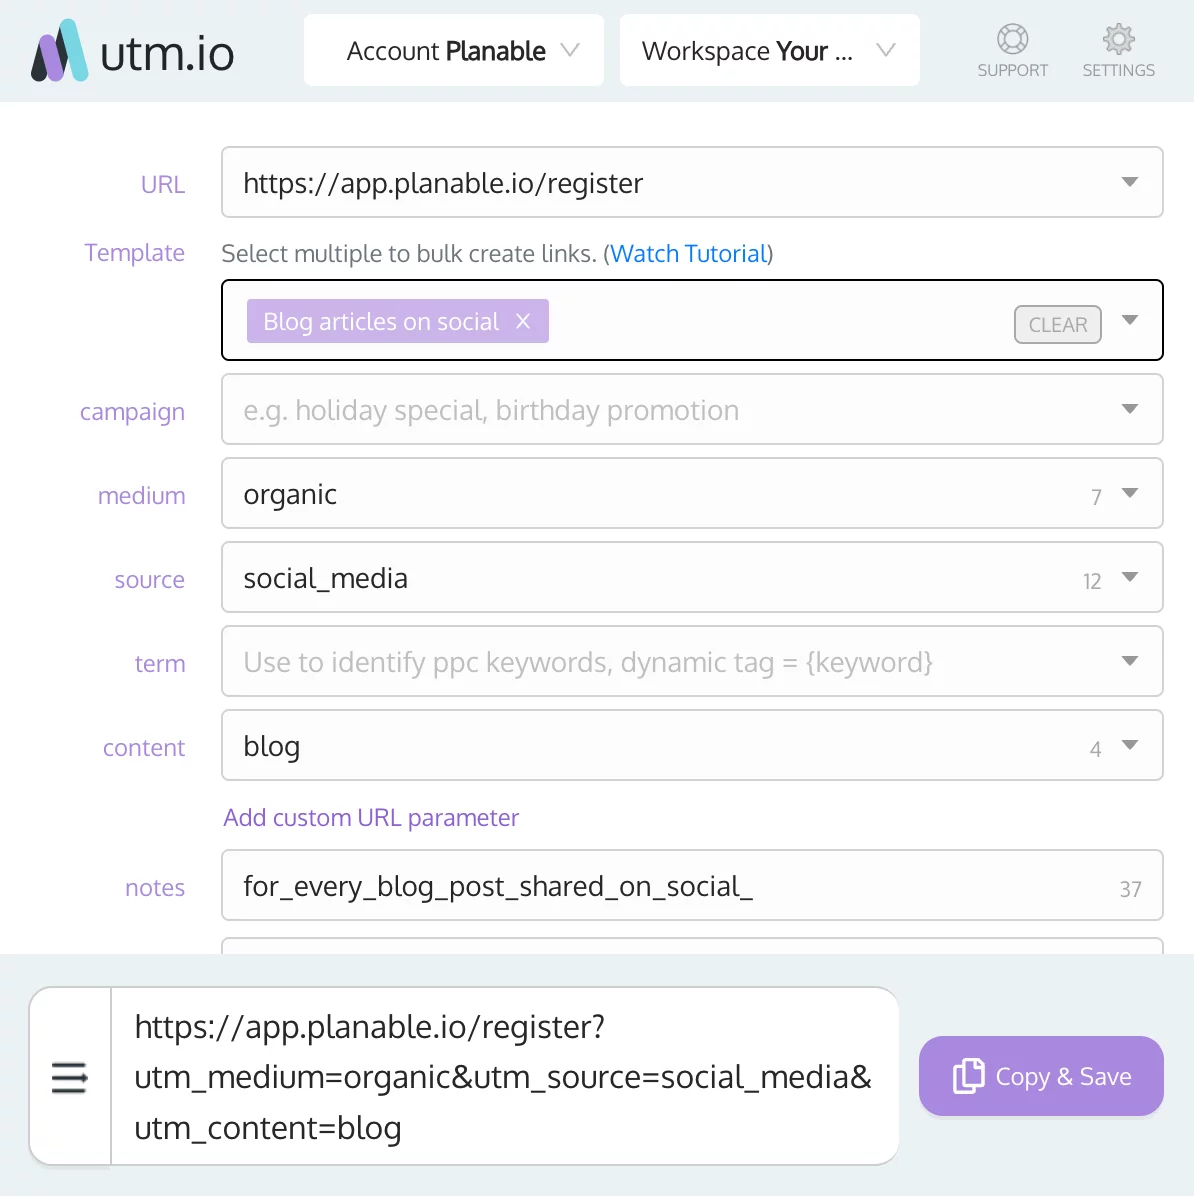 UTM.io screenshot showing the settings for a URL with fields such as medium as organic, source as social_media, and content as blog.